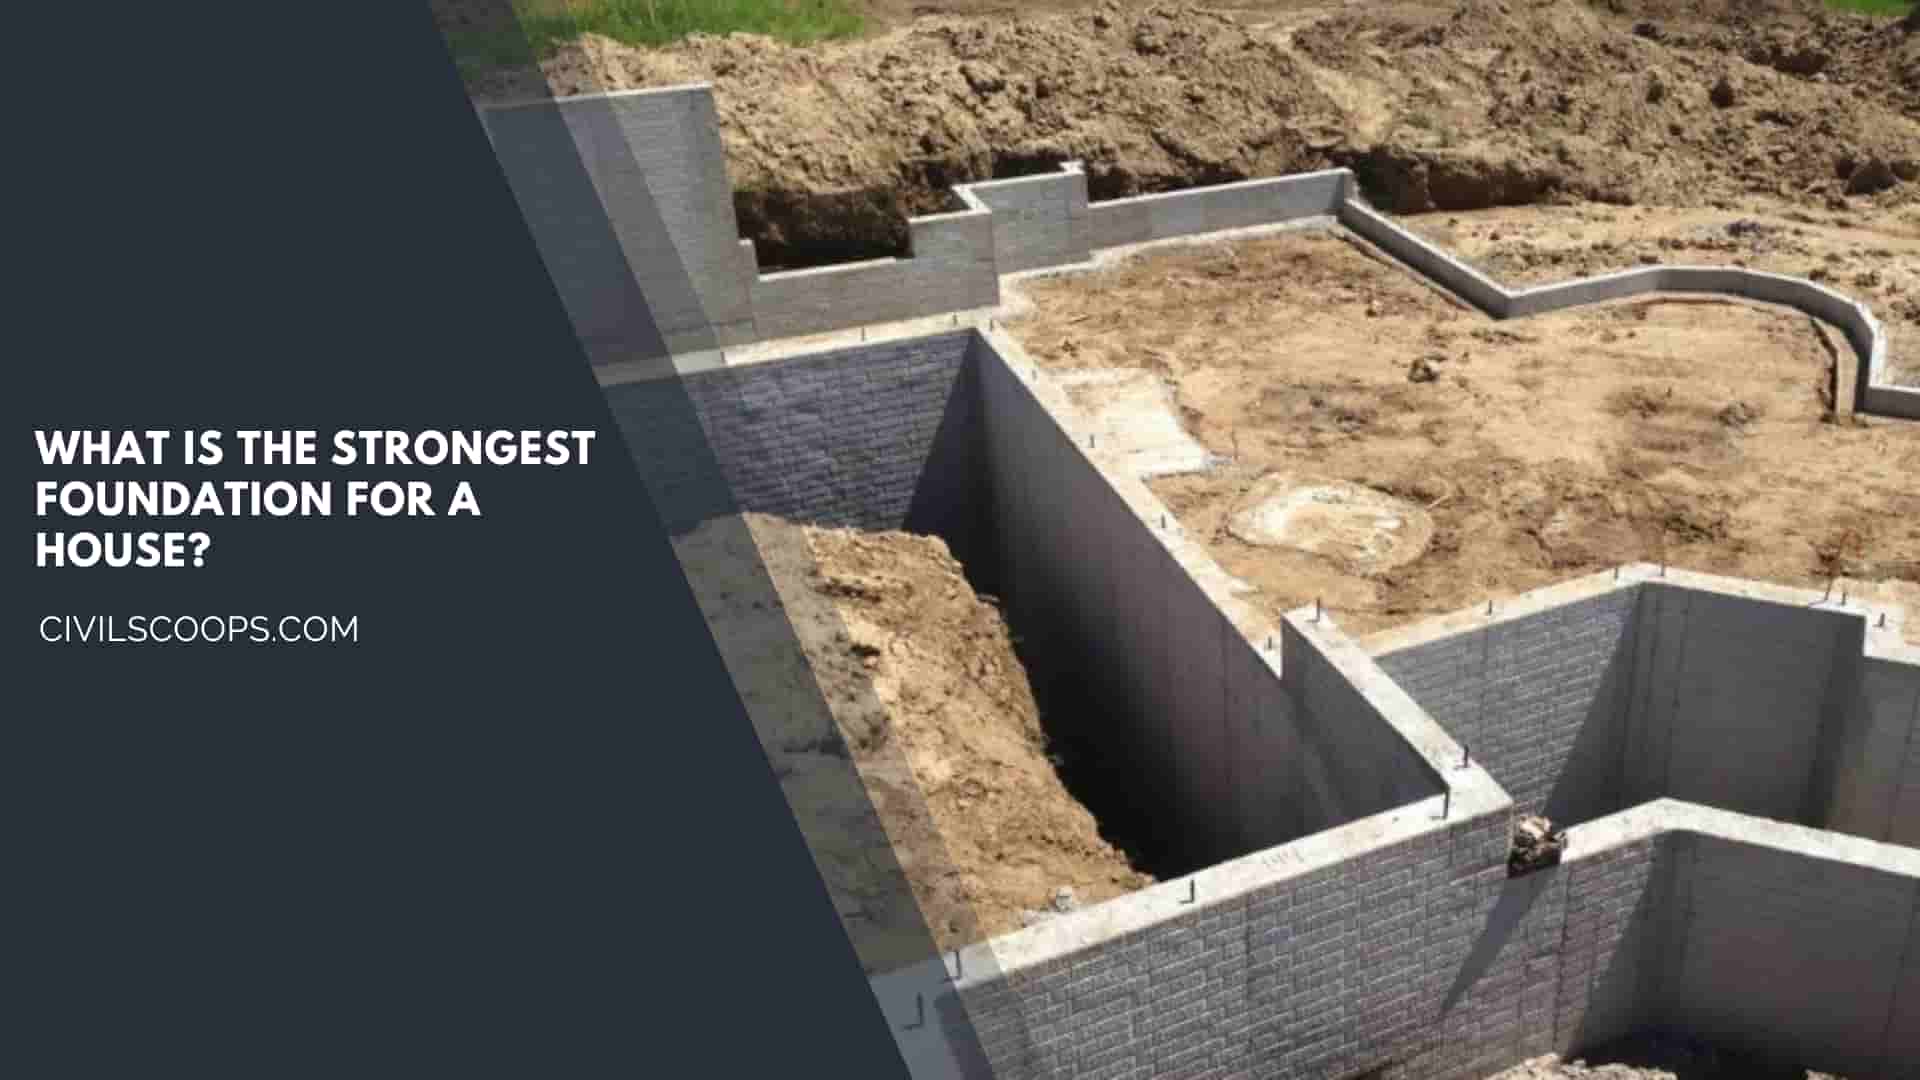 What Is the Strongest Foundation for a House